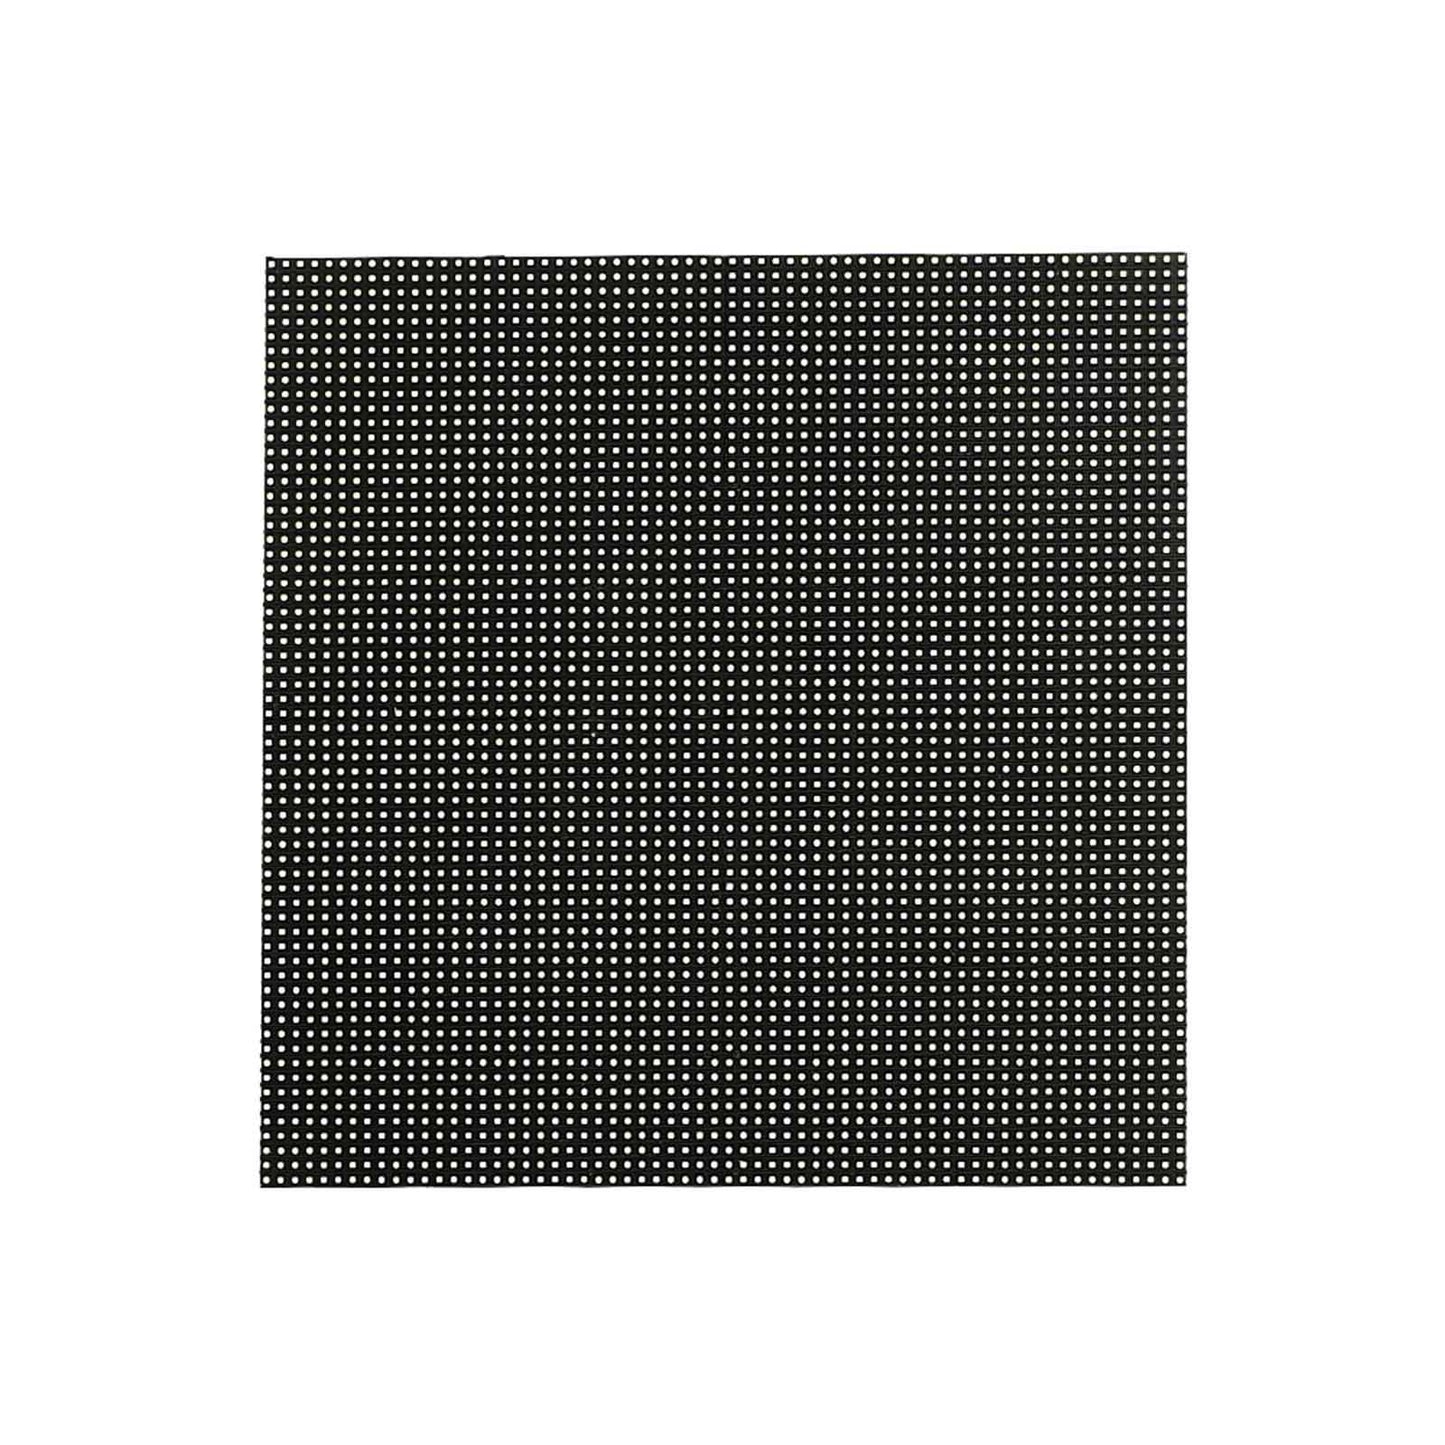 P4.81 Outdoor SMD RGB 250x250mm Front Service 1/7 LED Module